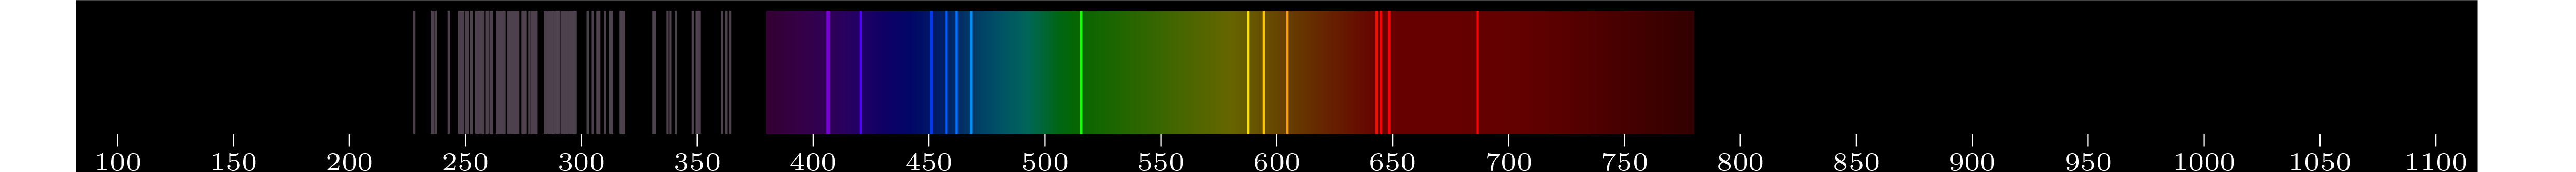 emmision spectra of element Ta